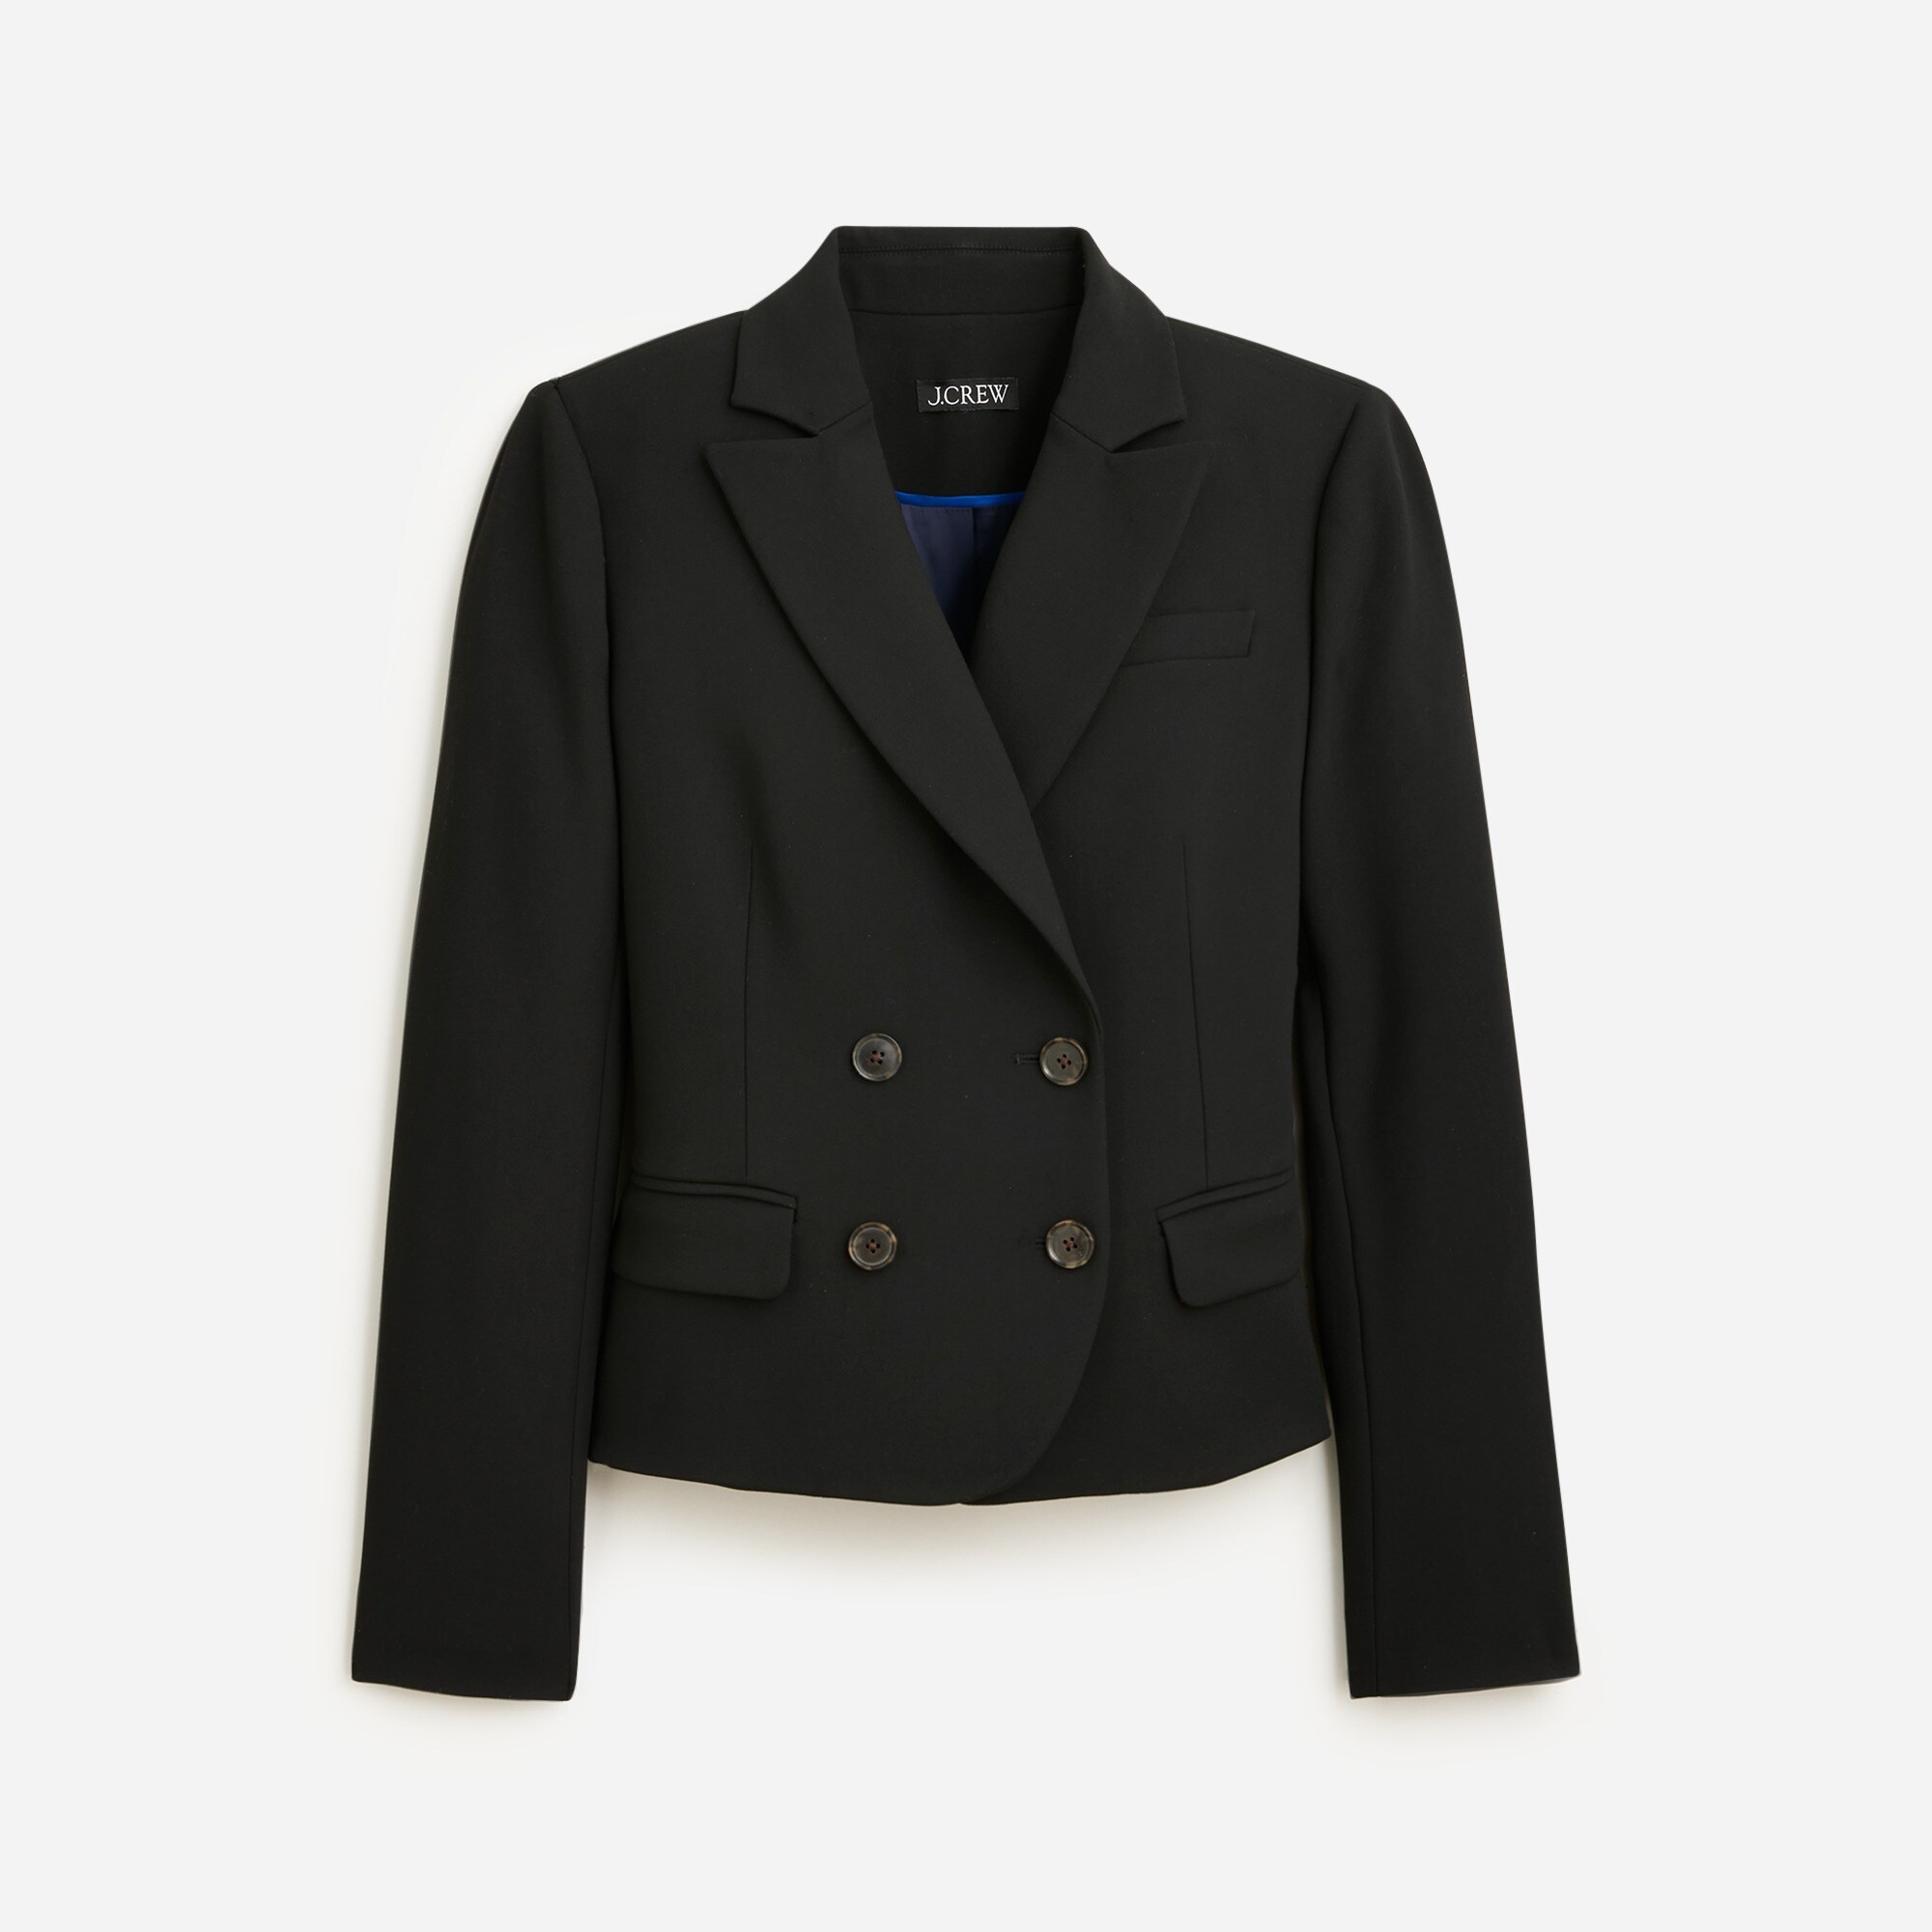  Slim-fit double-breasted blazer in four-season stretch